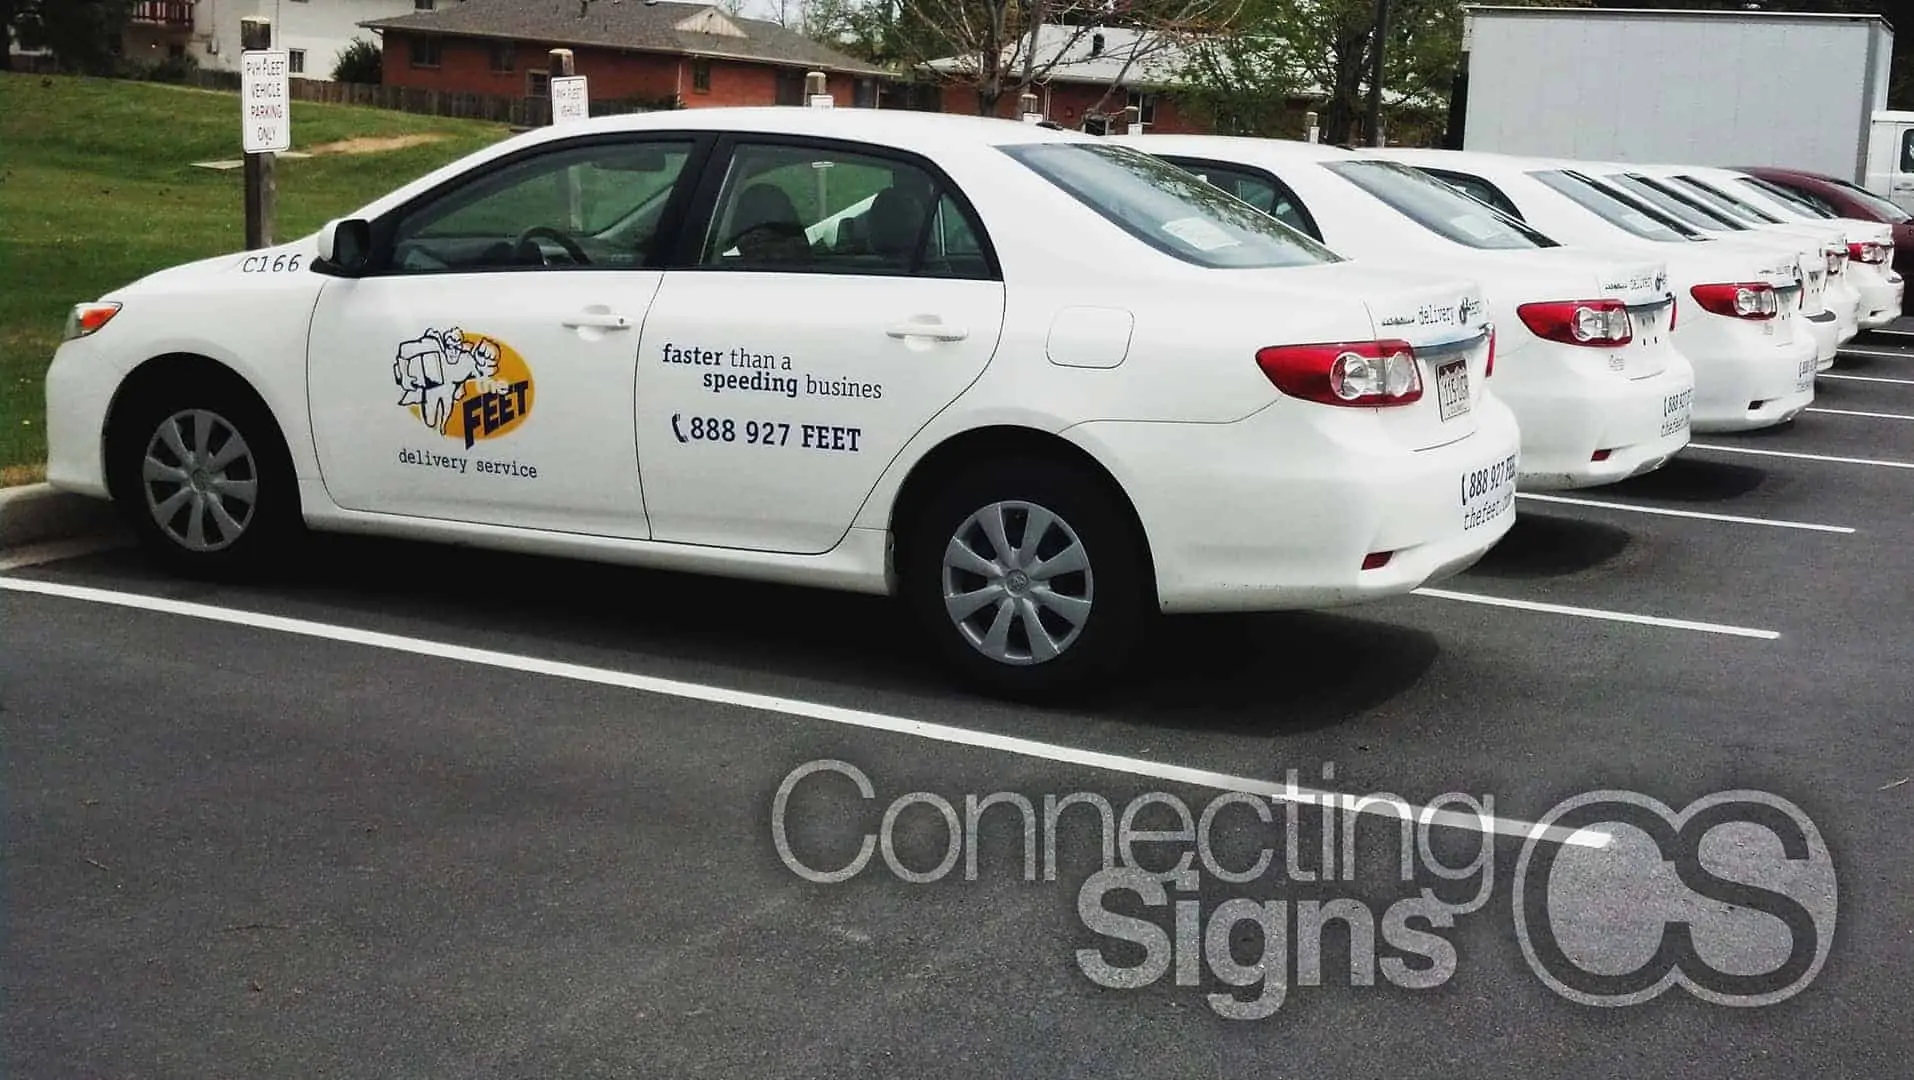 Commuter Cars - Fleet Graphics - Connecting Signs